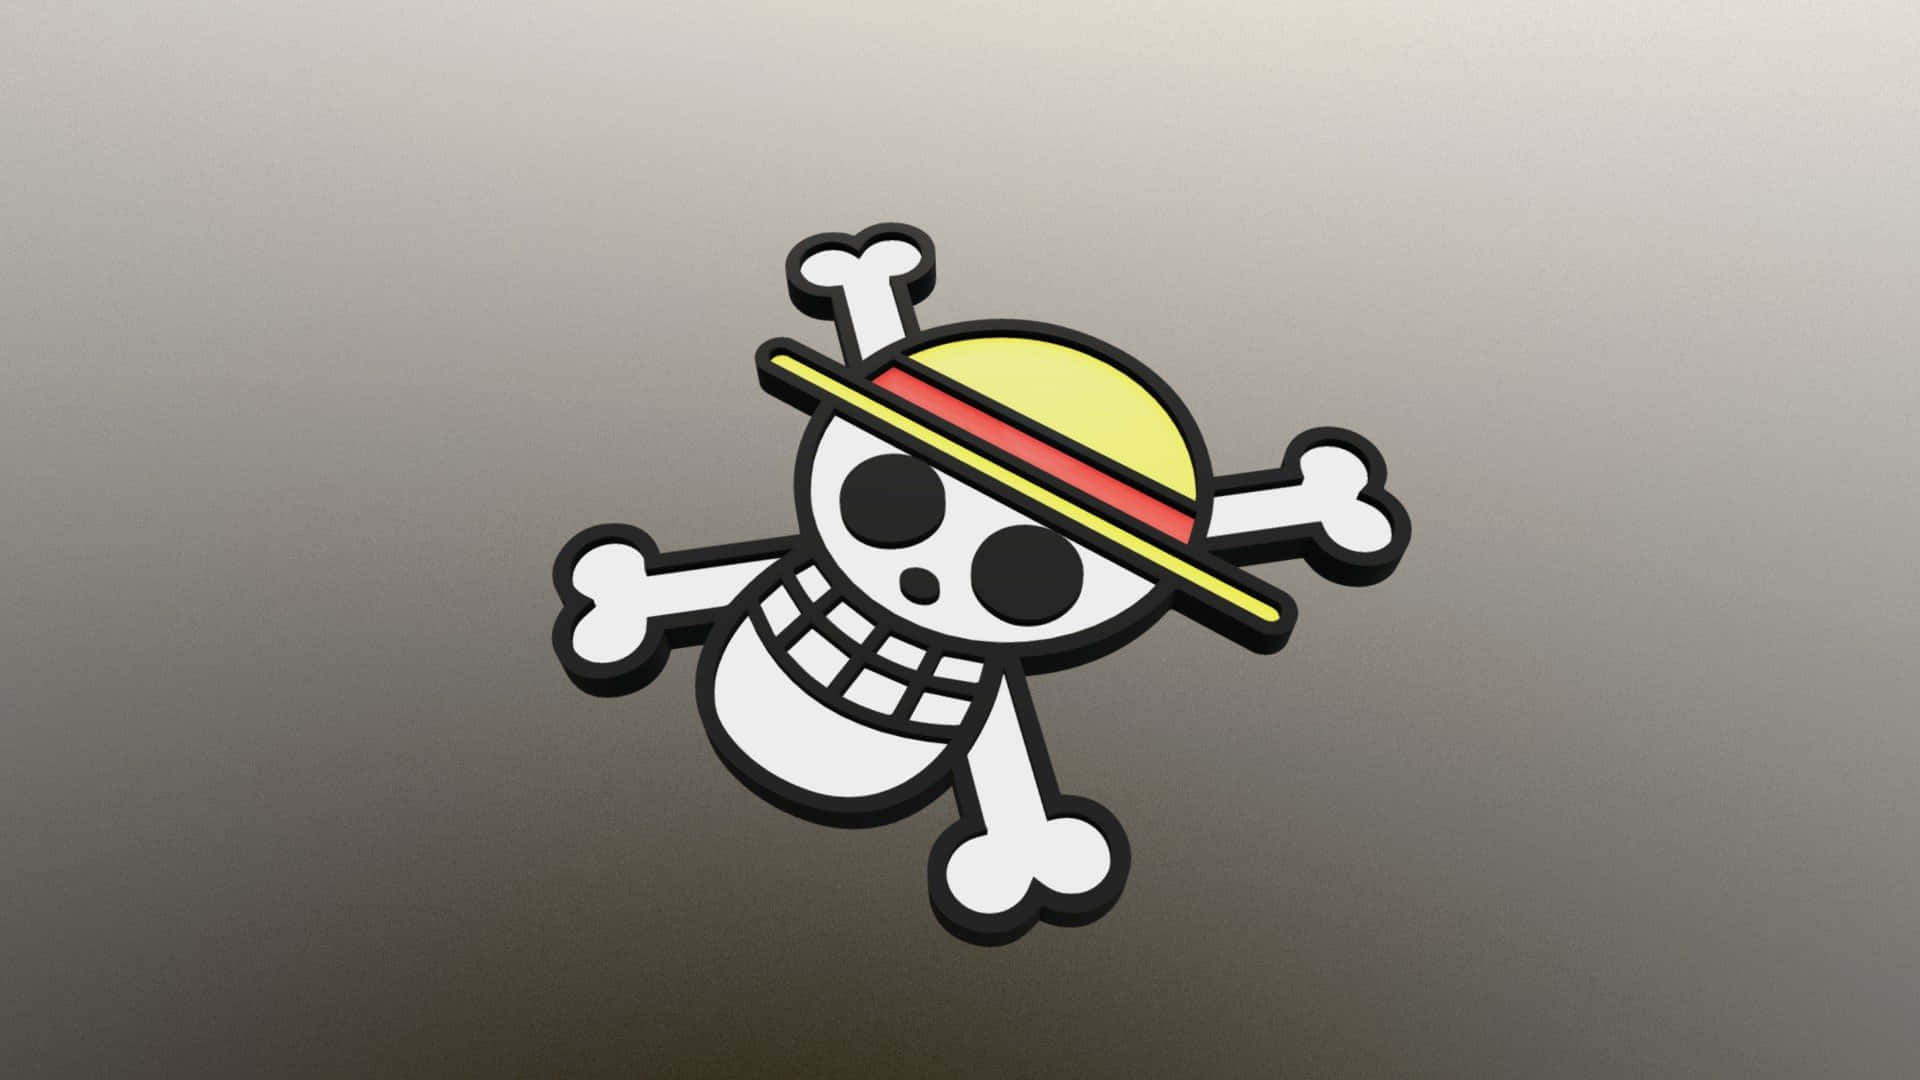 Straw hat logo for sun protection Wallpaper